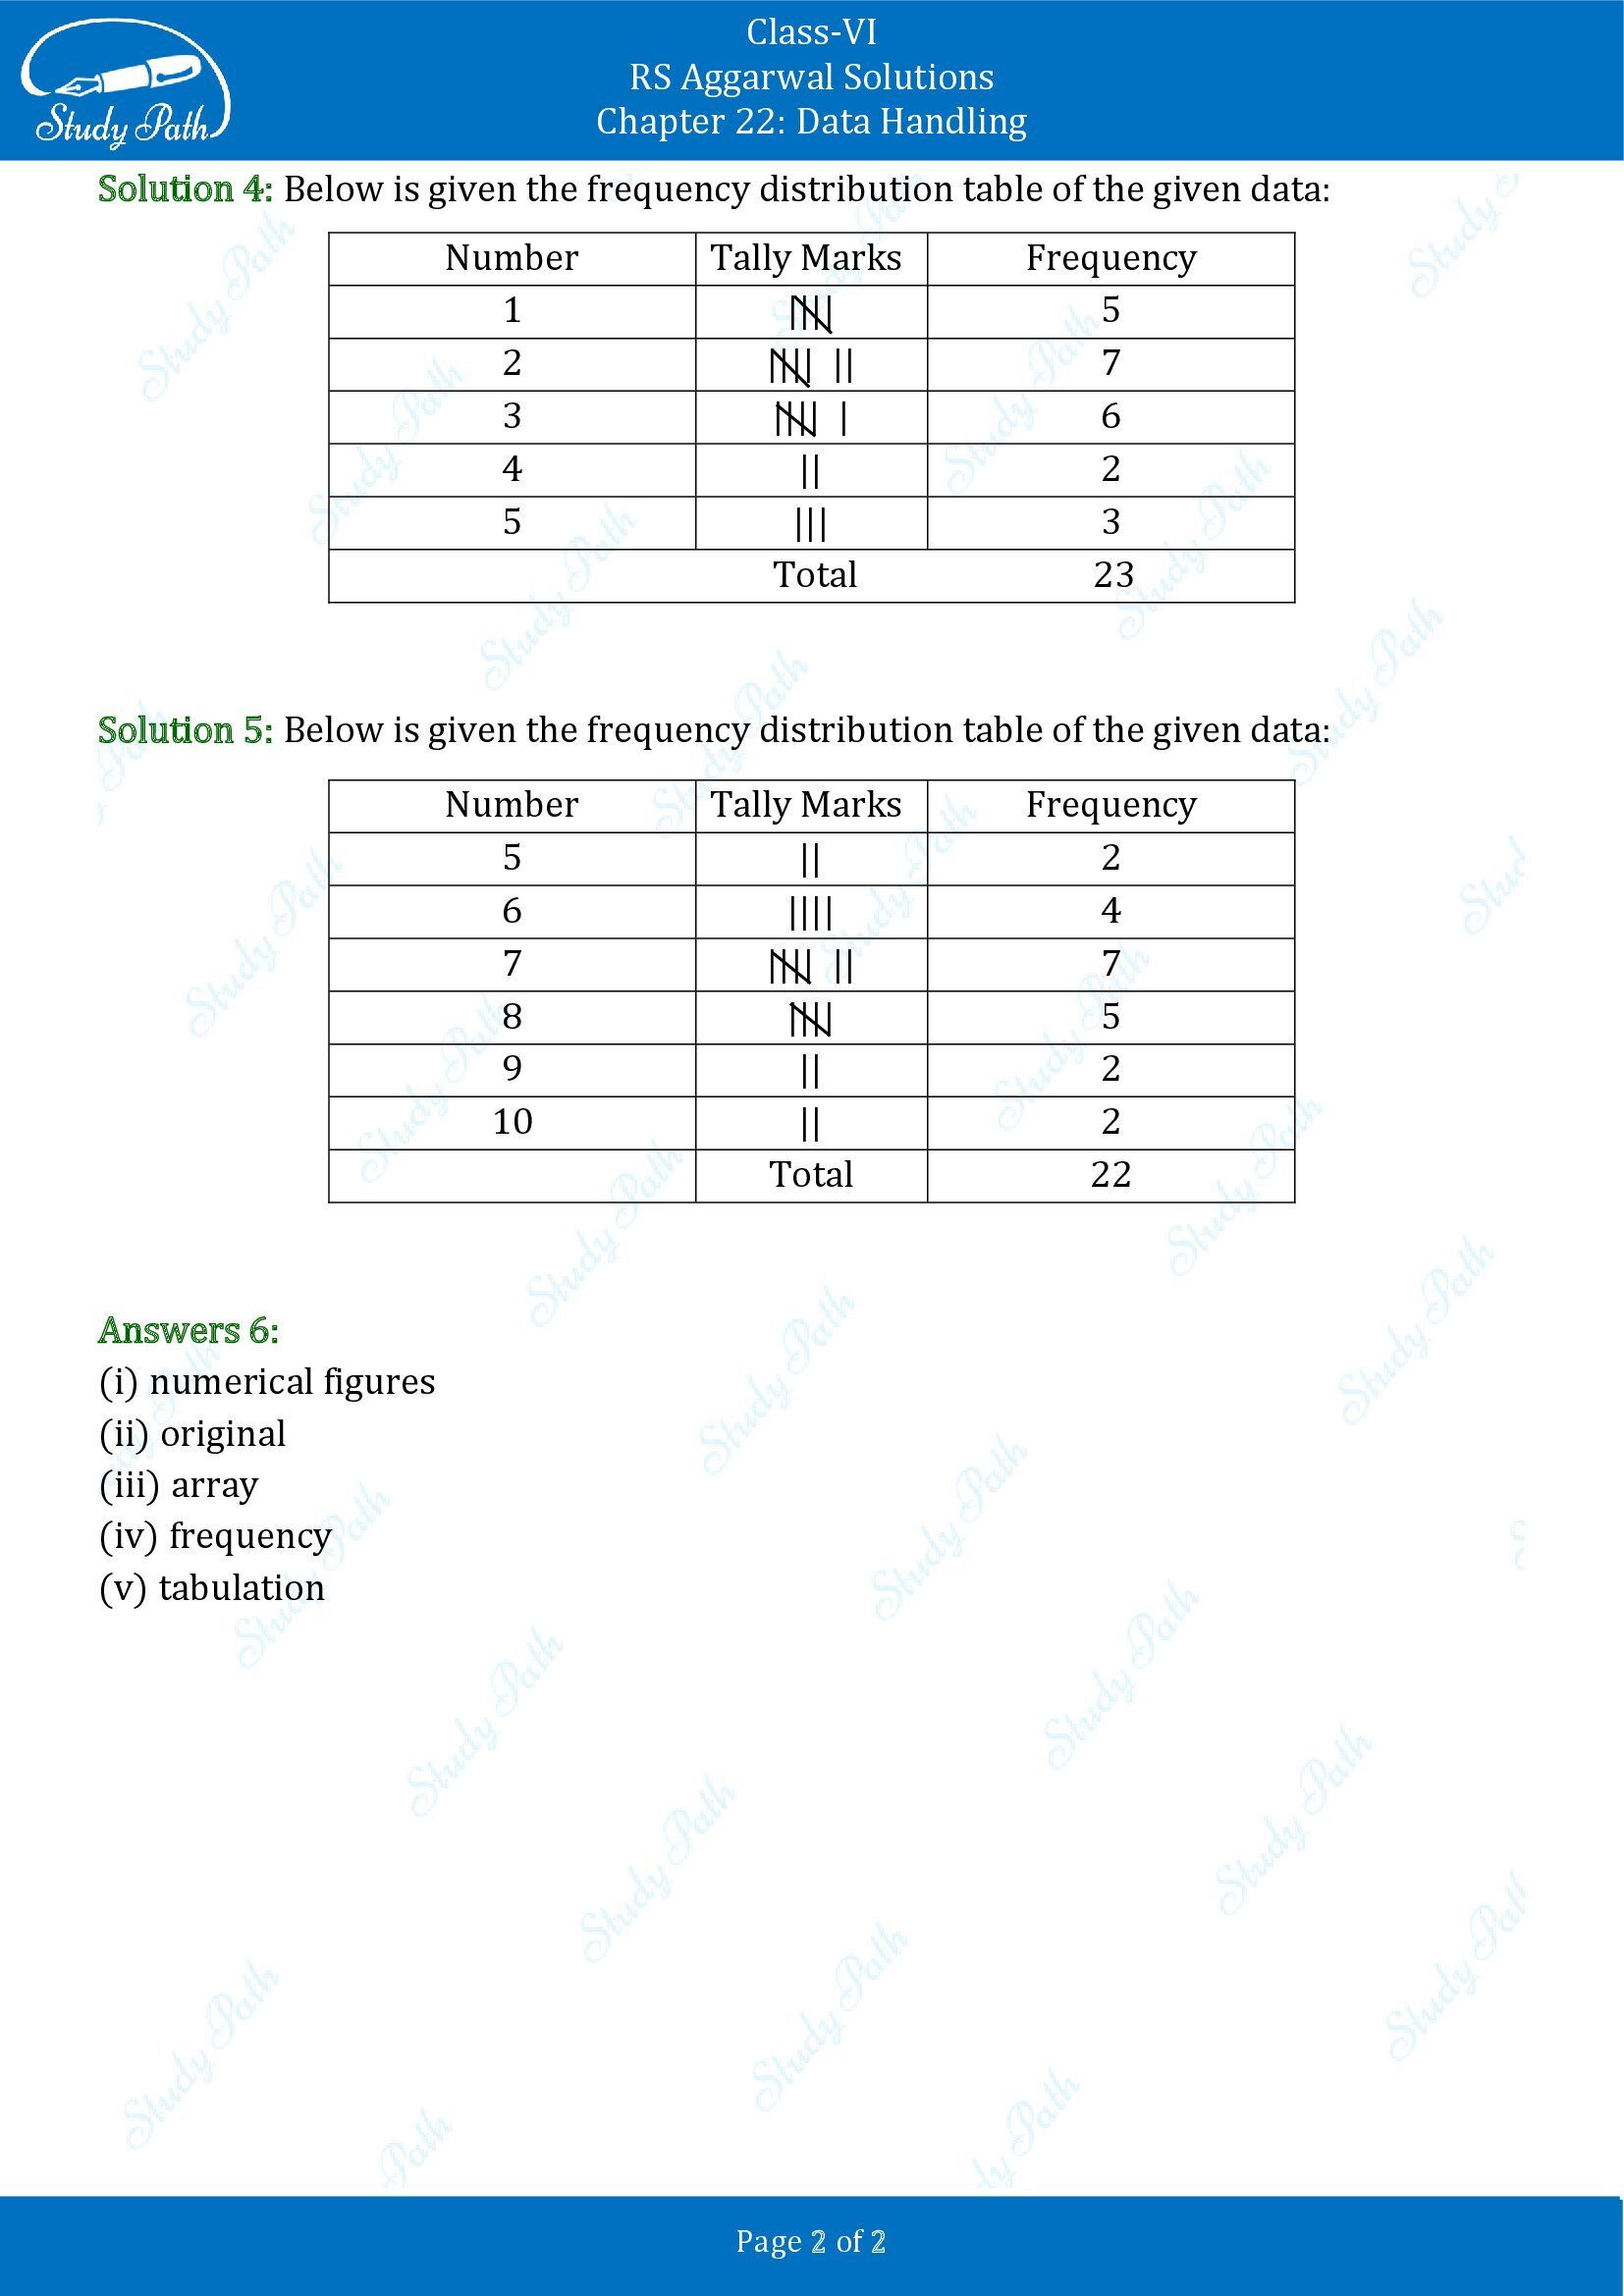 RS Aggarwal Solutions Class 6 Chapter 22 Data Handling 00002